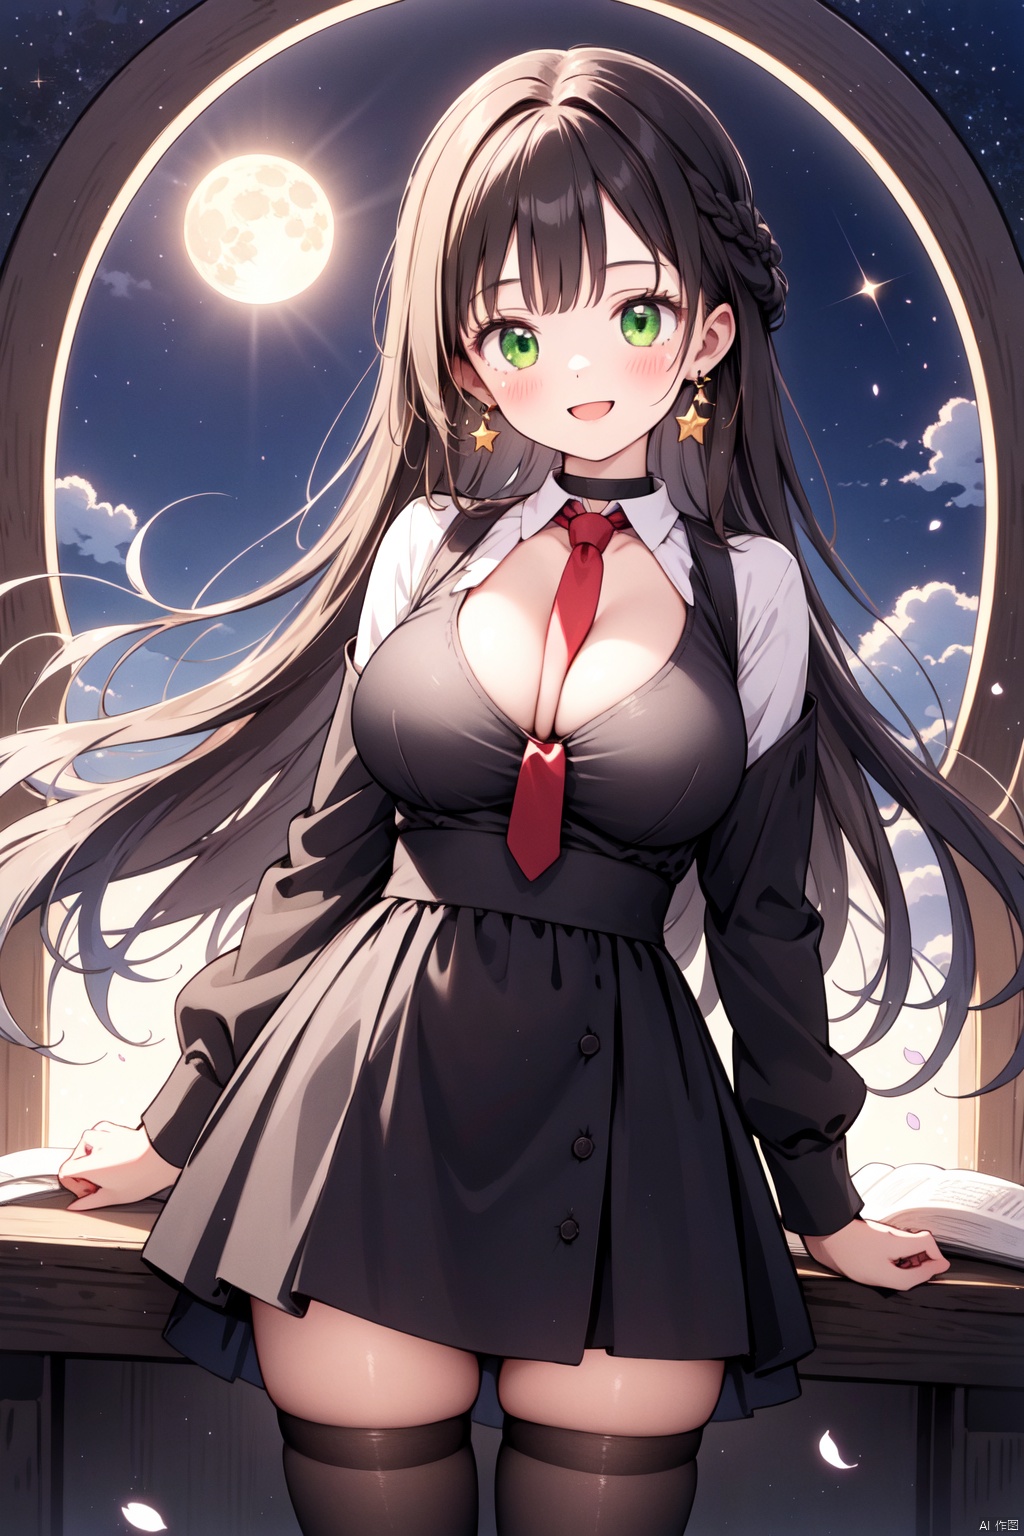  1girl, bangs, black_necktie, blush, book, braid, breasts, card_\(medium\), choker, cleavage, clipboard, crescent_moon, earrings, earth_\(planet\), flower, full_moon, glint, green_eyes, holding, jewelry, large_breasts, long_hair, long_sleeves, looking_at_viewer, moon, moonlight, necktie, necktie_between_breasts, night, night_sky, open_mouth, paper, petals, planet, red_moon, shooting_star, sky, smile, solo, sparkle, sparkle_background, star_\(sky\), star_\(symbol\), starry_sky, sun, thighhighs, very_long_hair, window, maolilan